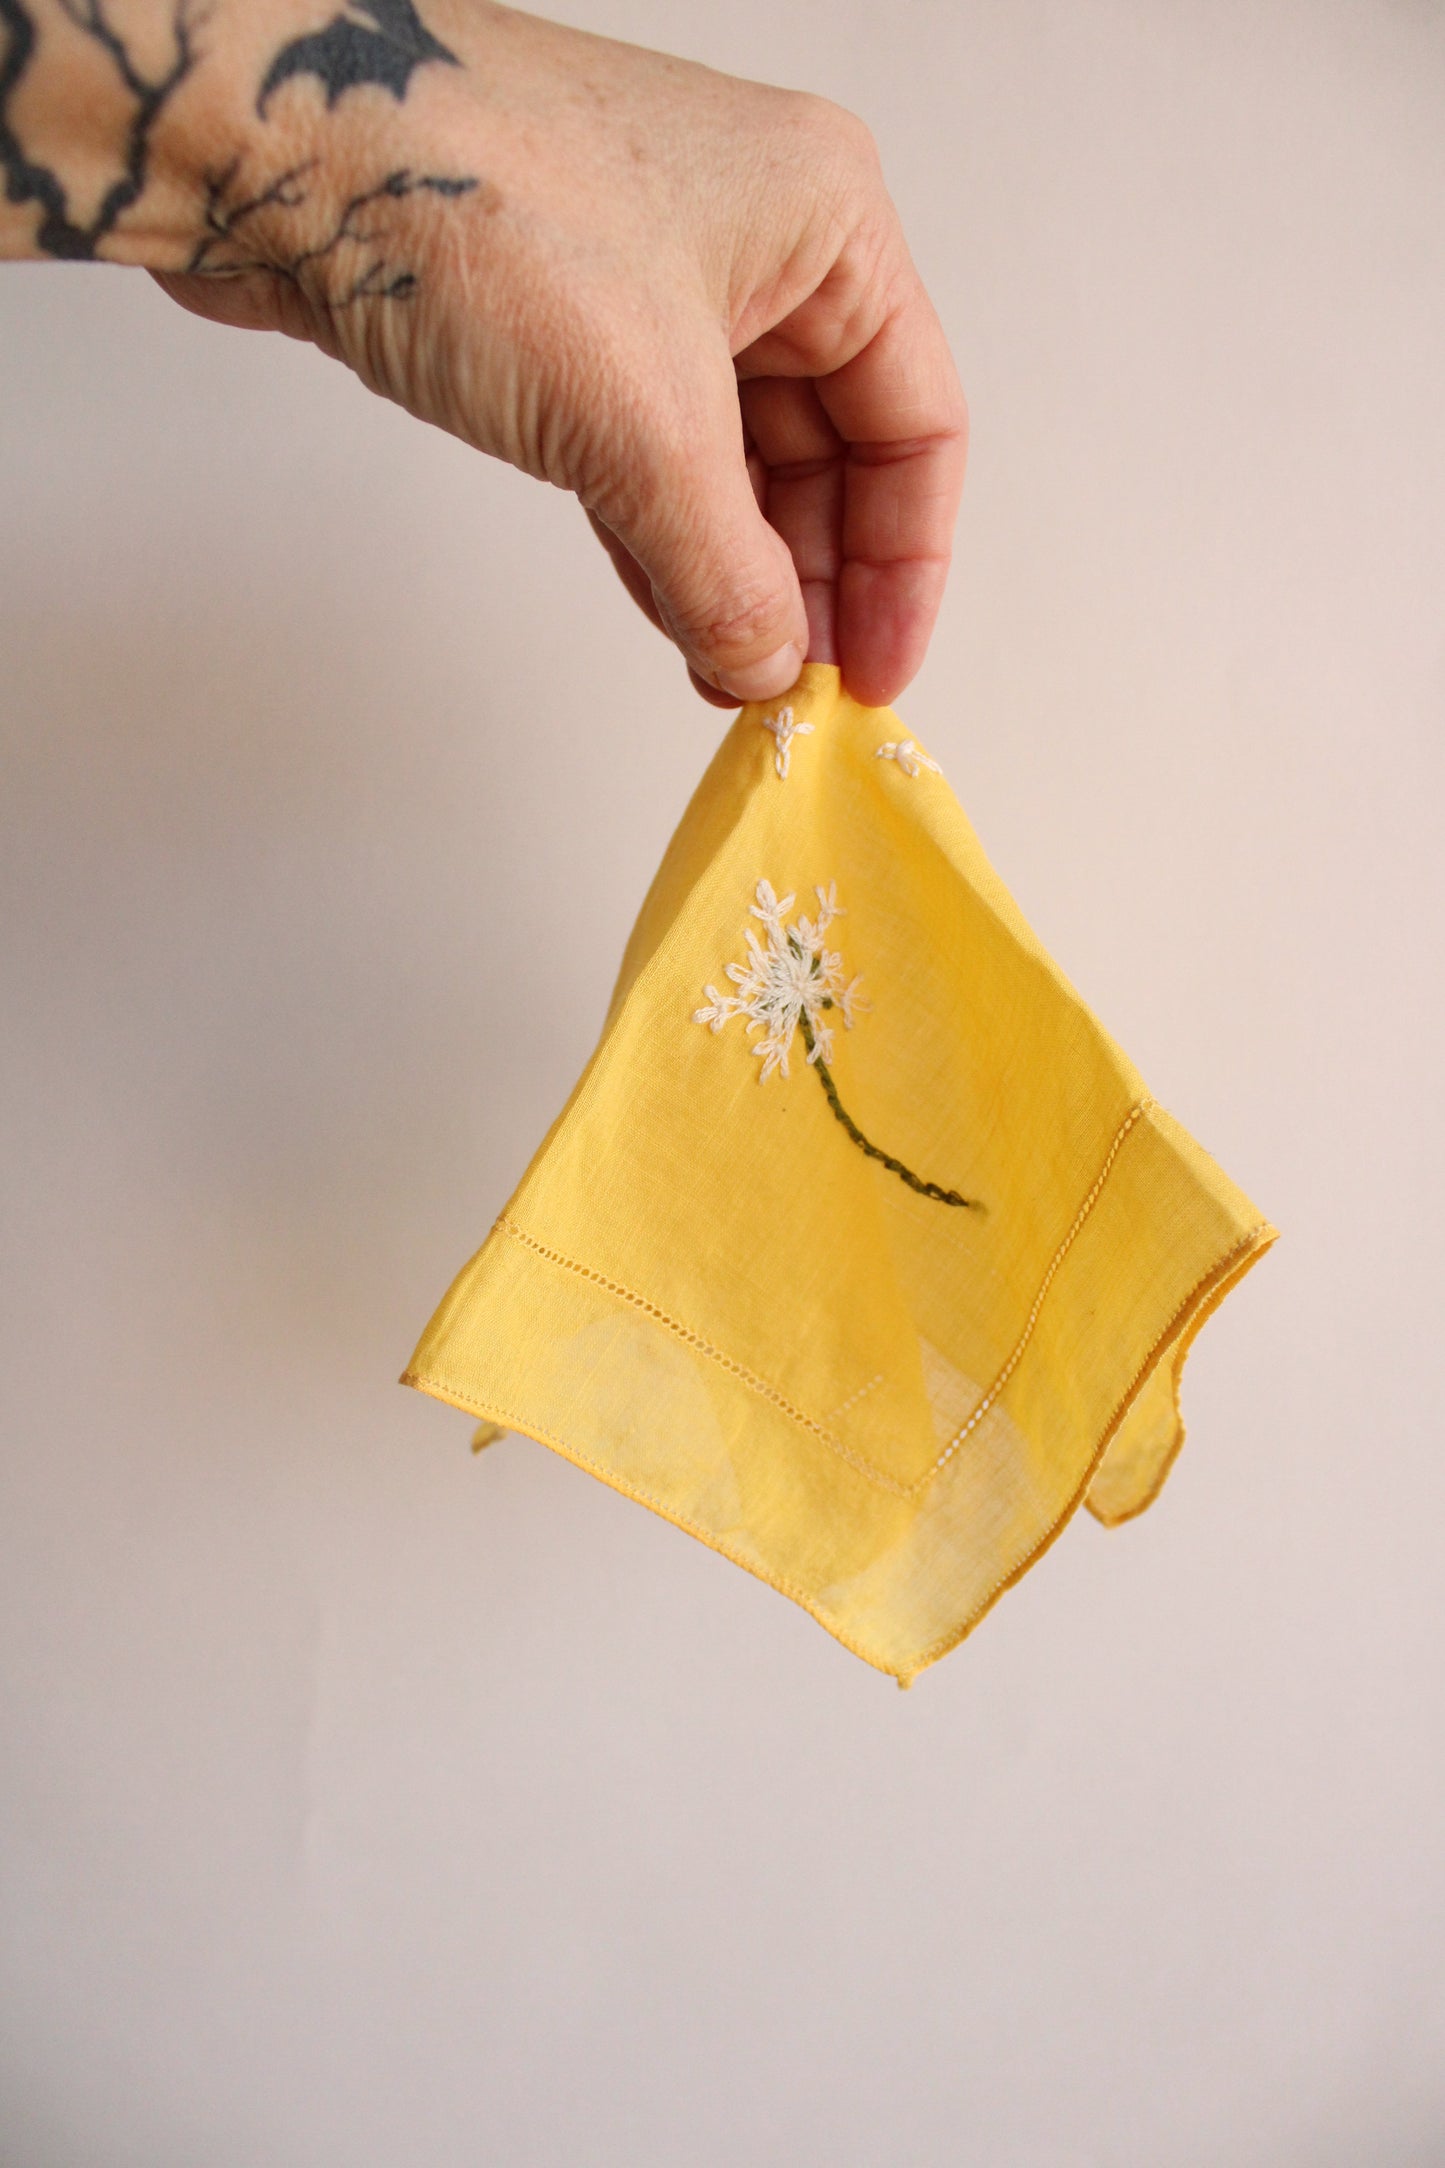 Hand Embroidered Dandelions on a Vintage Yellow Cotton Hanky